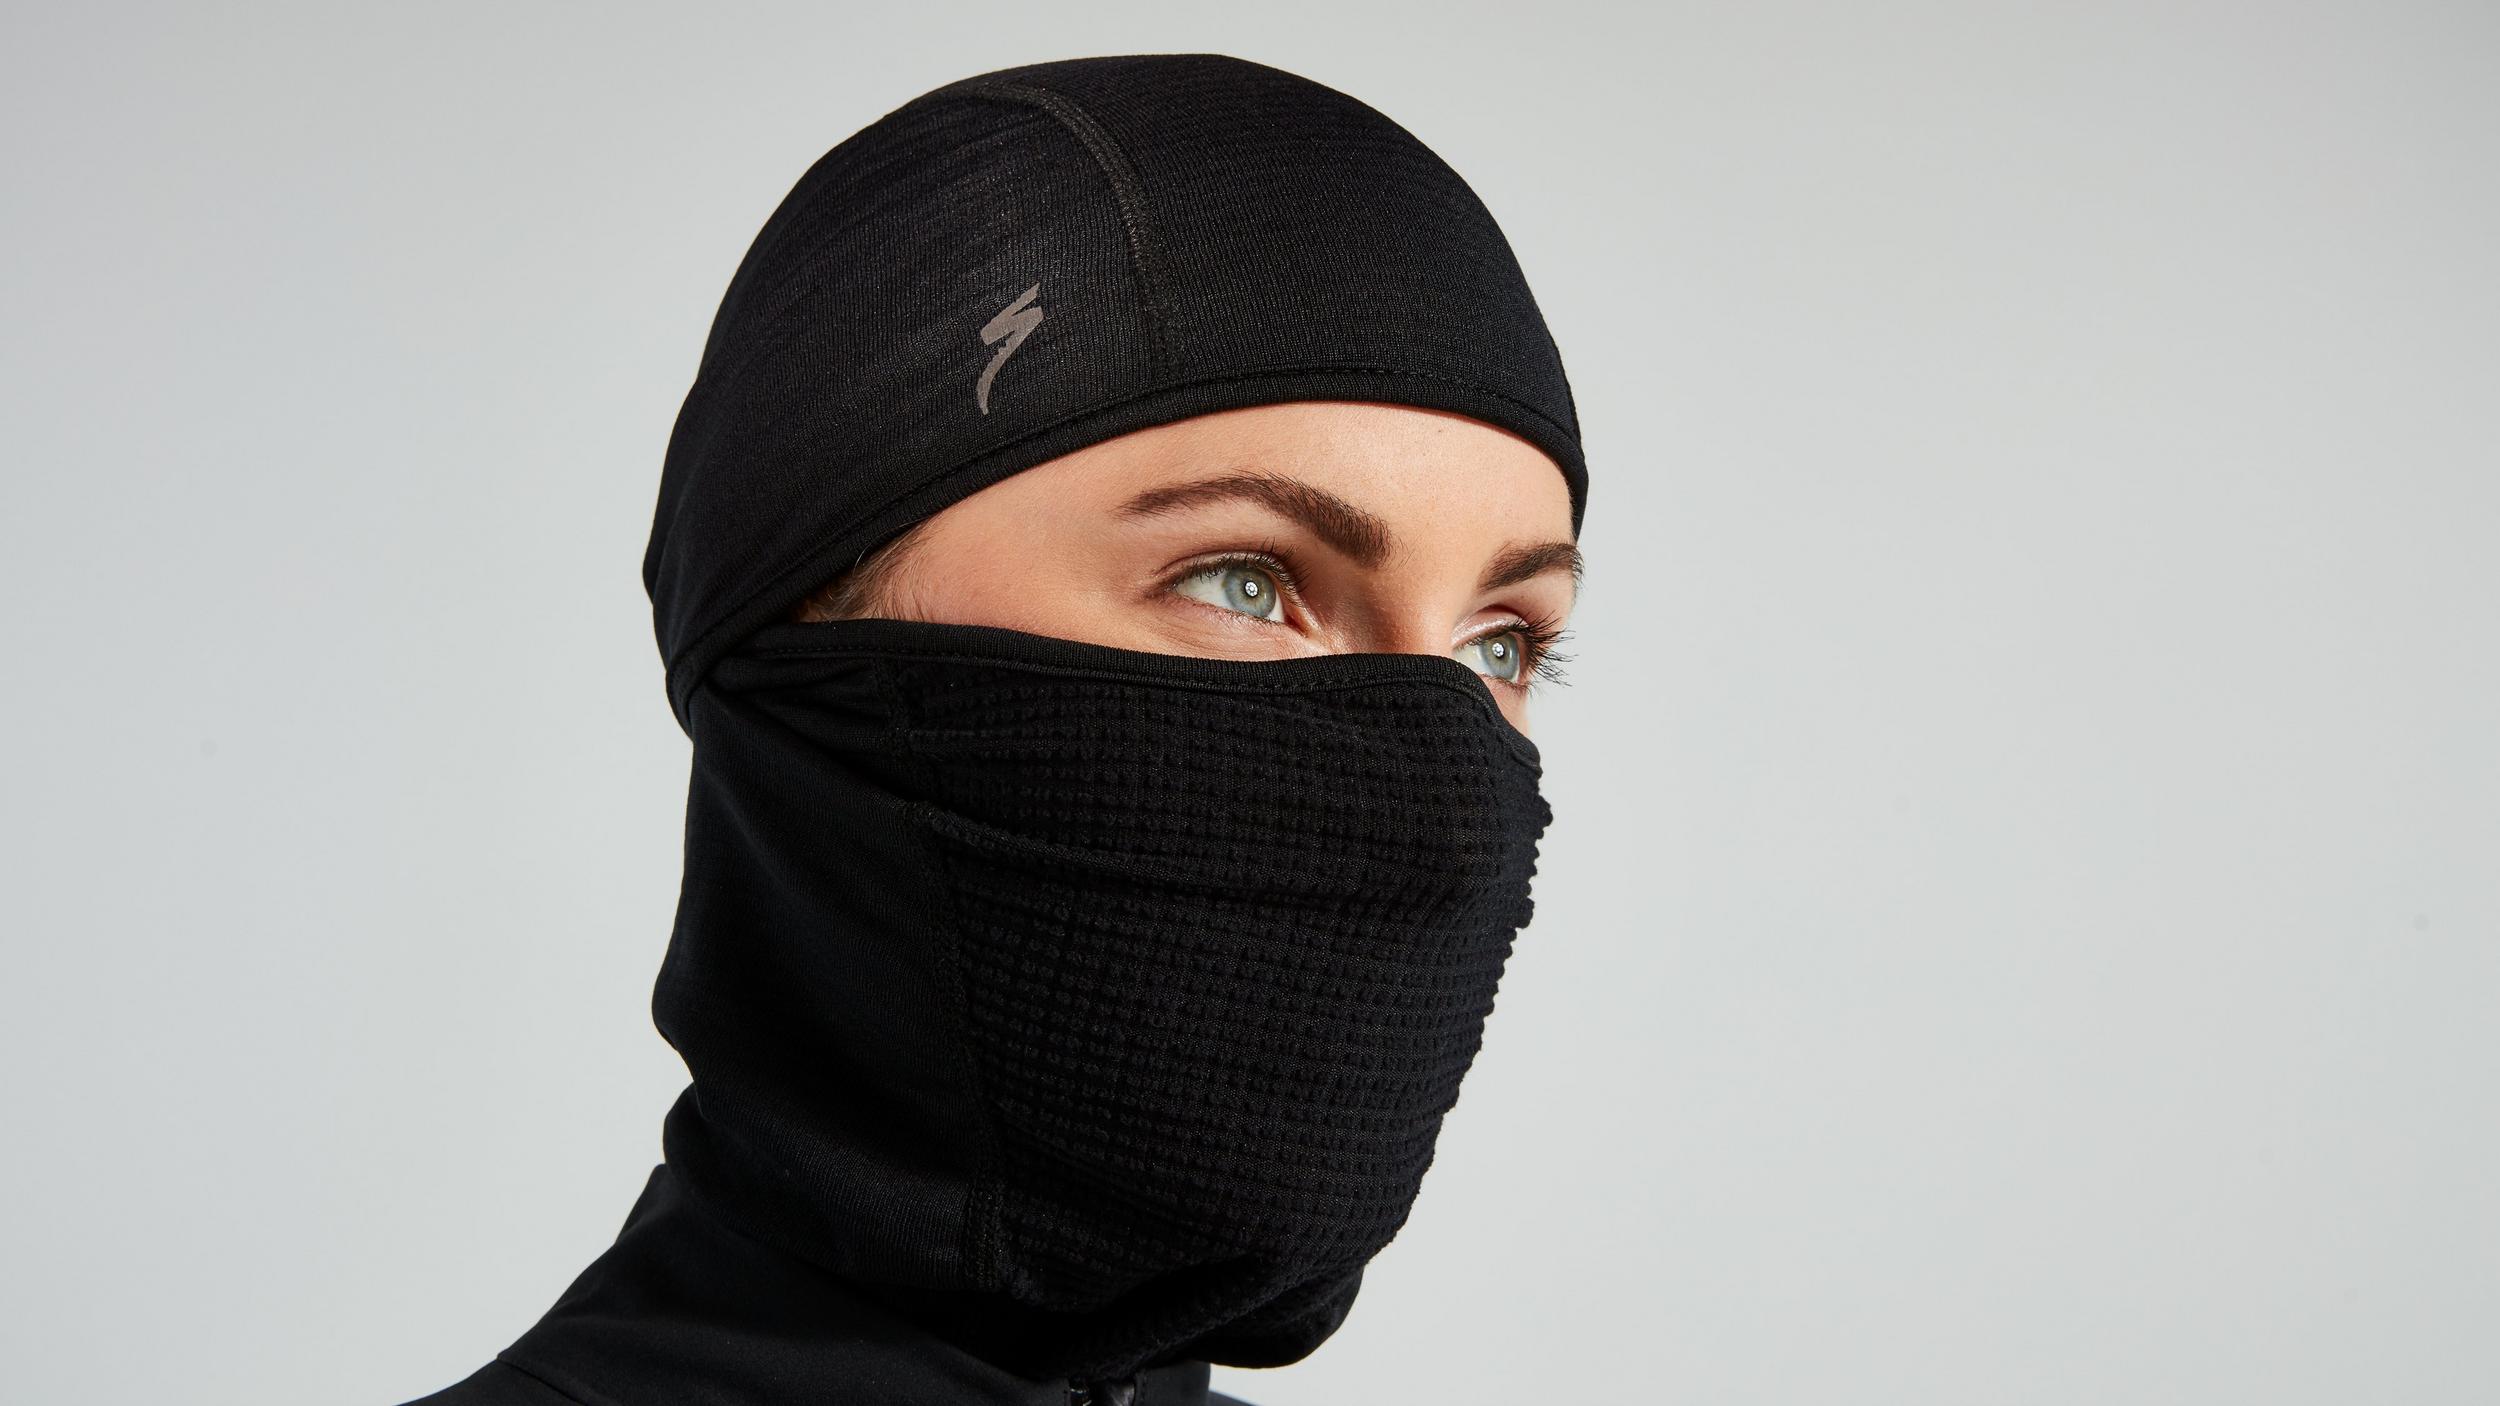 Specialized Prime Series Thermal Balaclava - Parkside Bikes